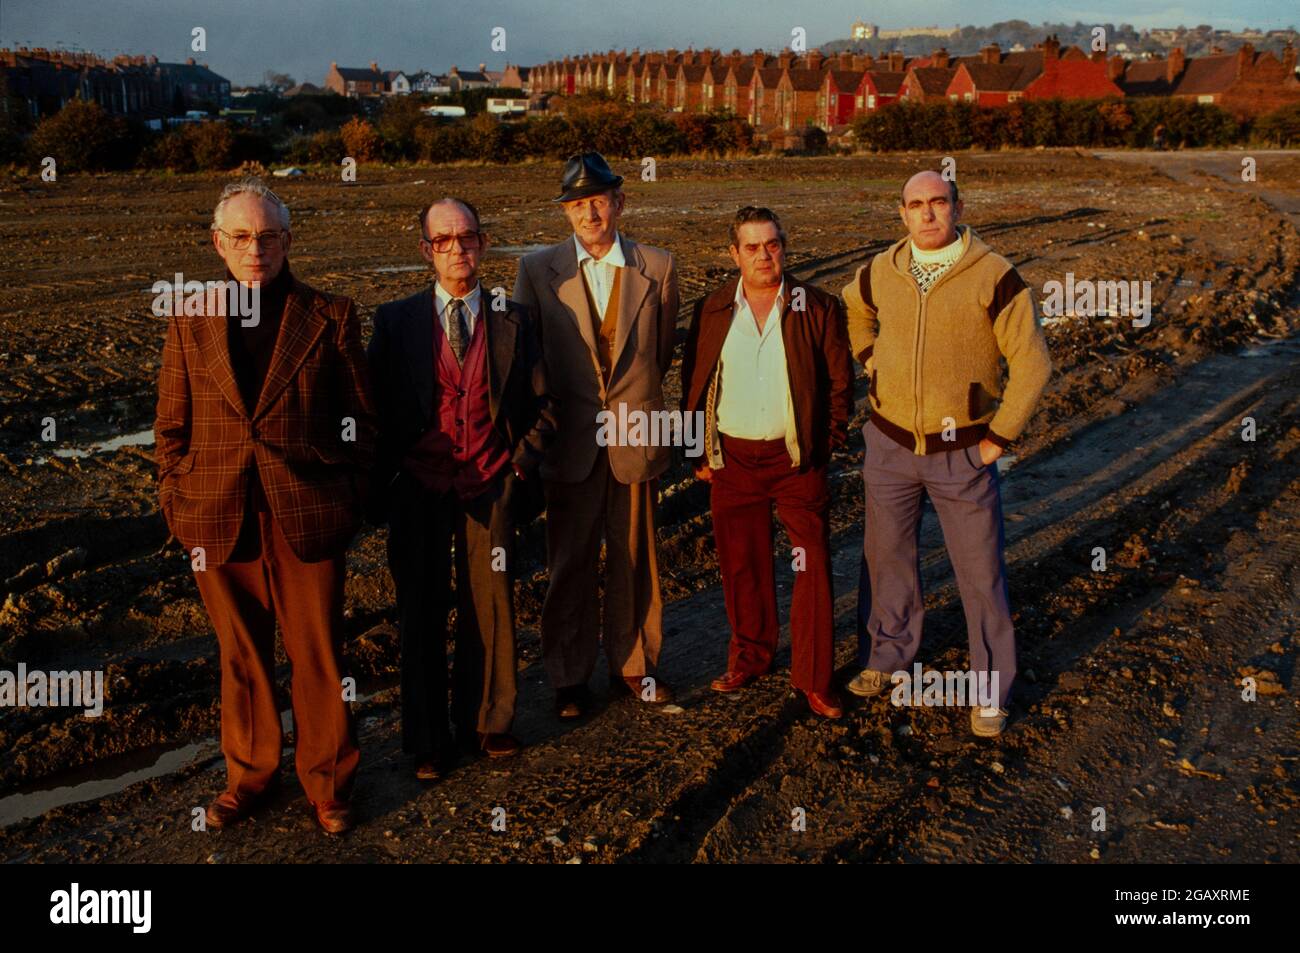 These 5 men worked together at the Coalite plant producing 2.4.5.T until it exploded in 1968.  They are standing at the site where informed obswervers believe the contaminated debris from the explosion is buriede.  The site is being redeveloped for a children's playground. The men  have all had heart attacks, kidney problems and are impotent. The medical problems are consistant with exposure to the Dioxins in 2,4,5-T.  September 1981 Stock Photo